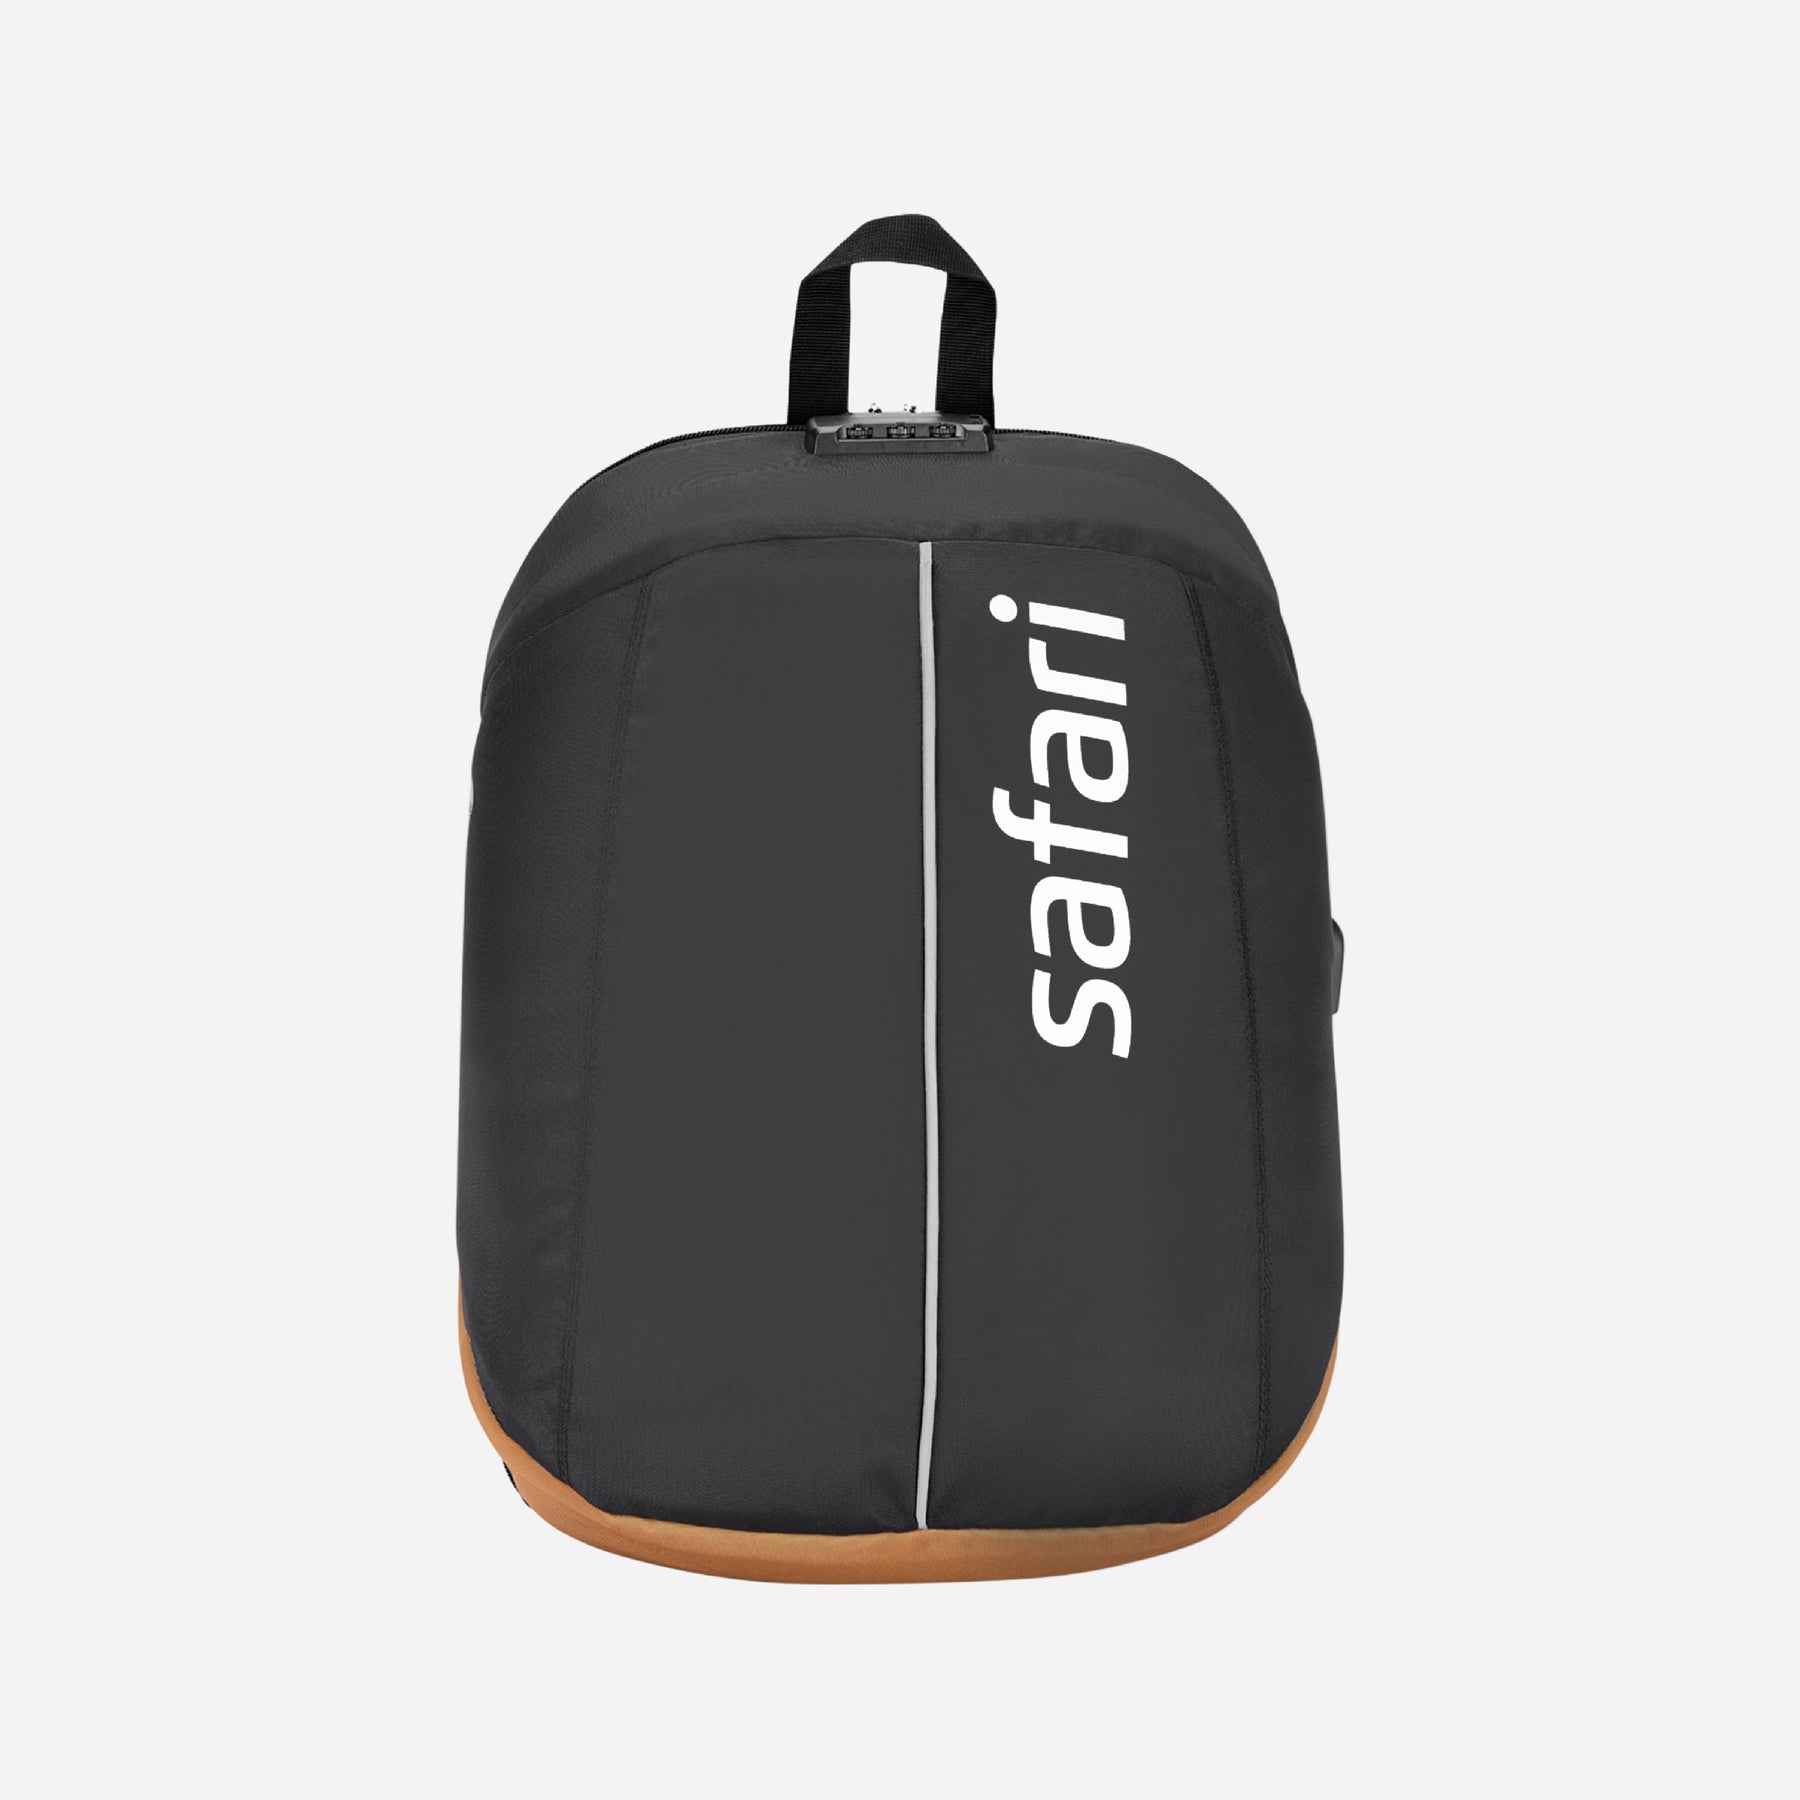 Ignite Hard luggage and Vault Laptop Backpack- Anti-Theft Combo